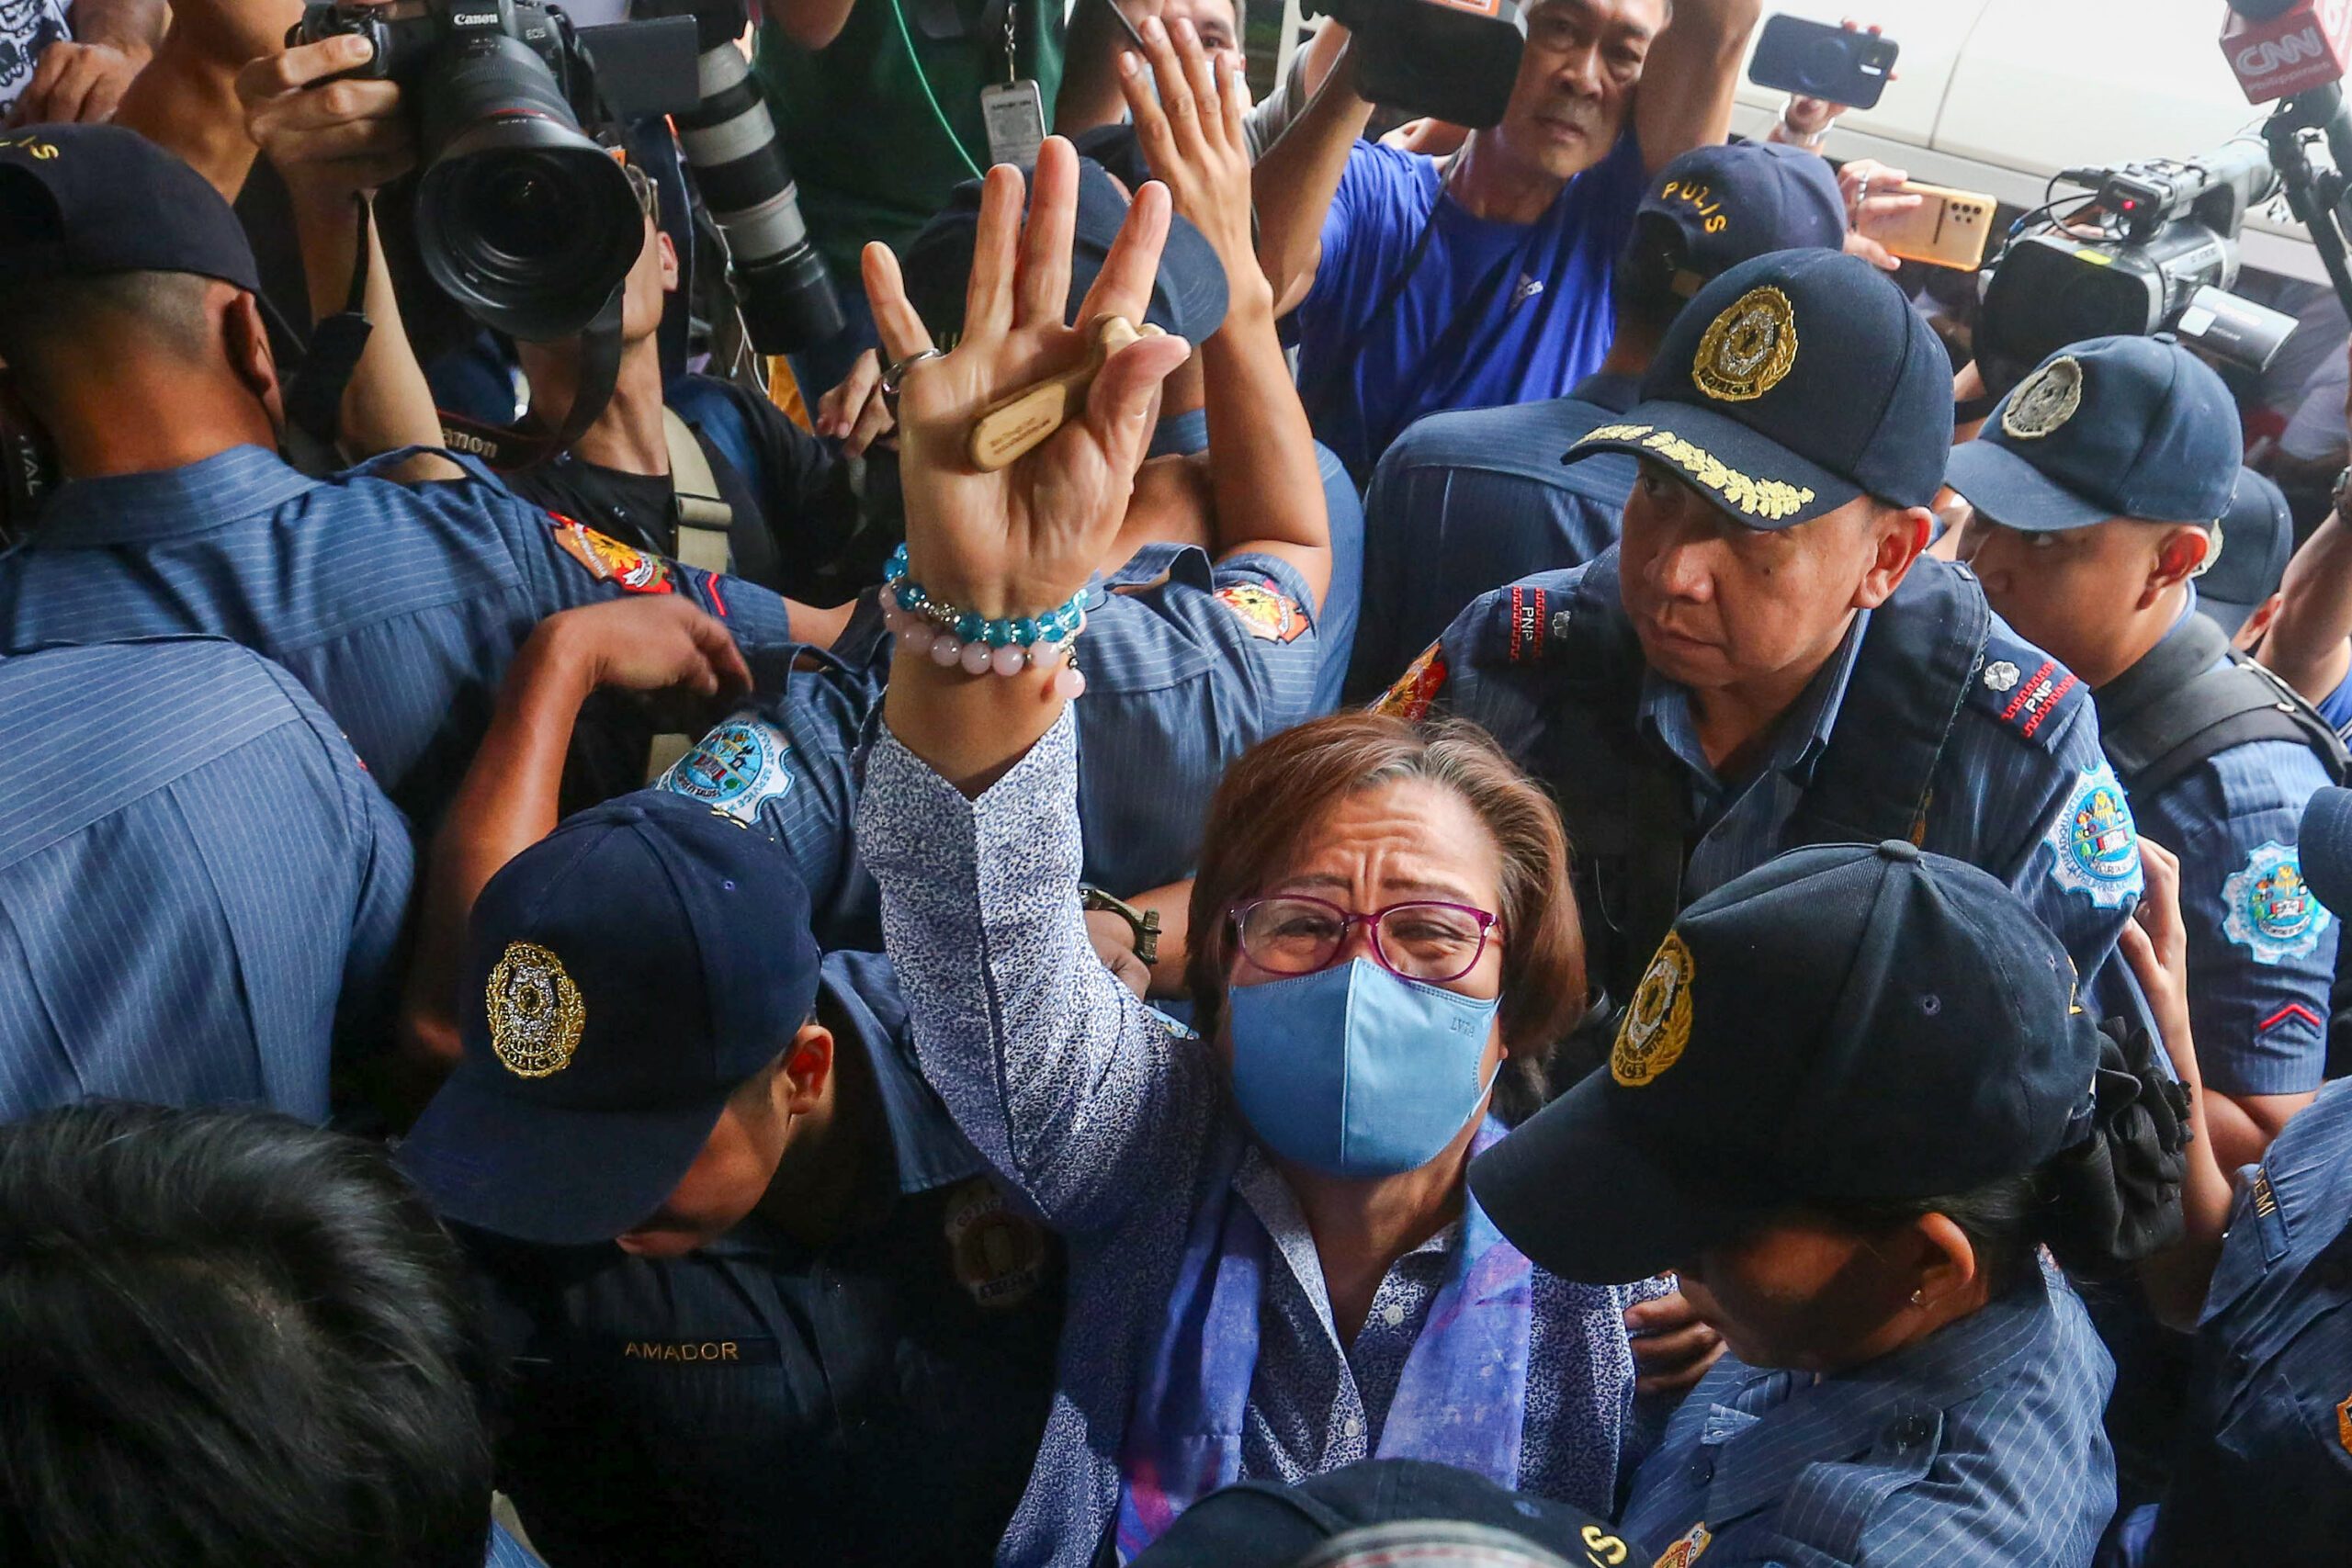 As opposition lawmakers celebrate De Lima’s bail, calls for accountability remain